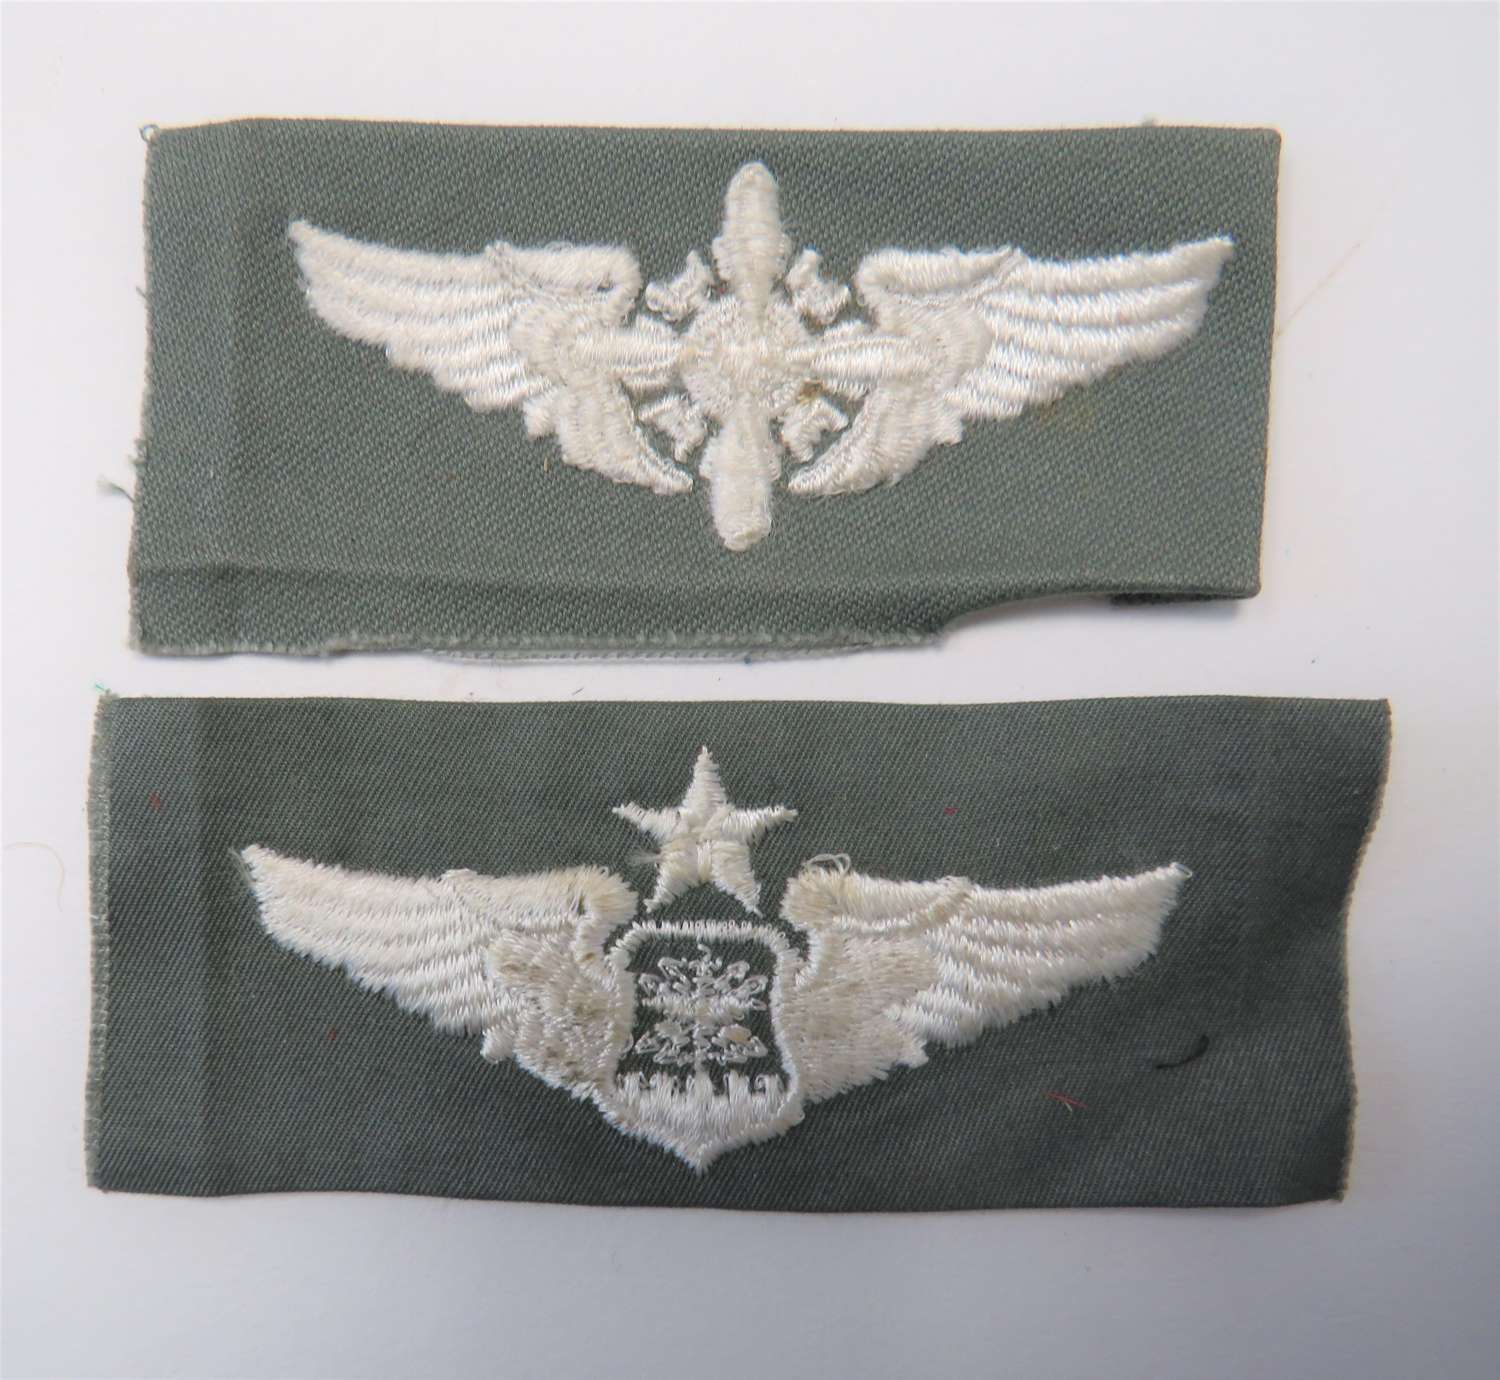 Two Post War American Aircrew Overall Wings